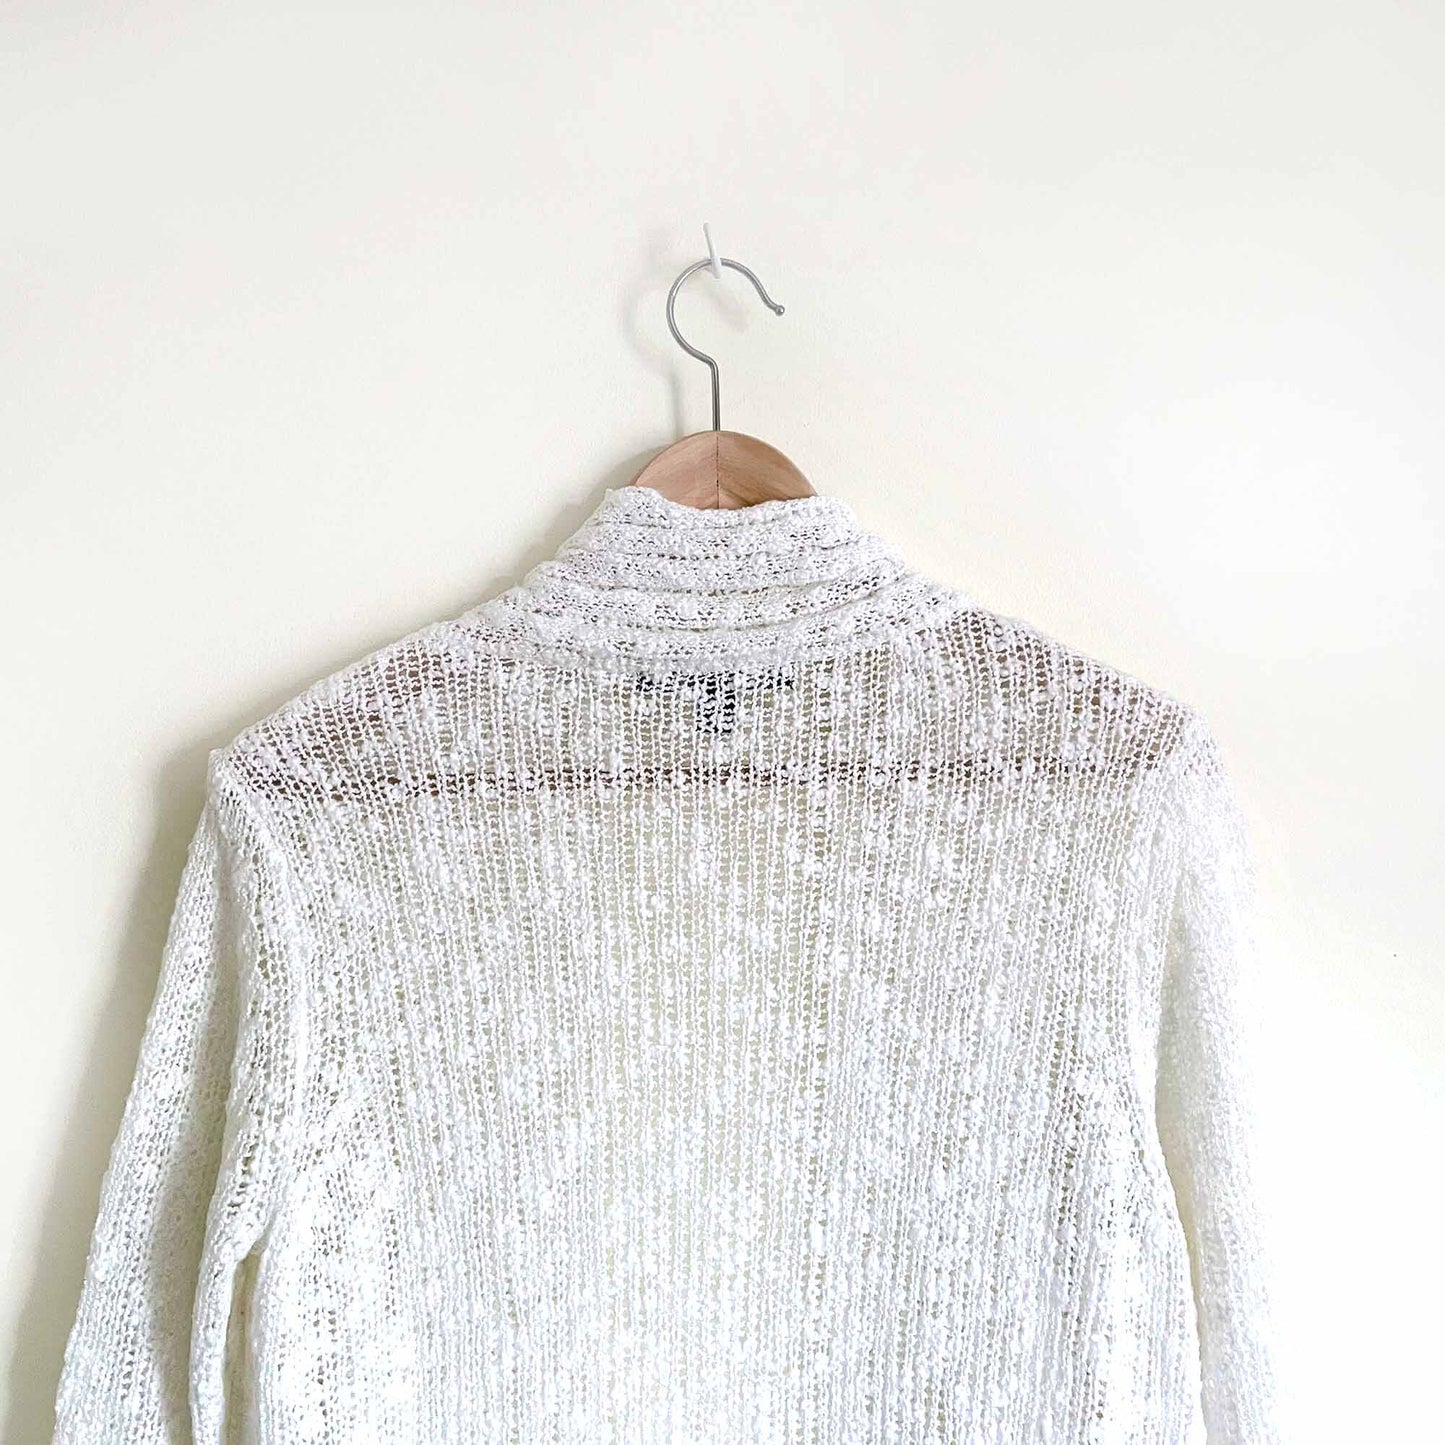 anthropologie fever loose-knit open cardigan - size small